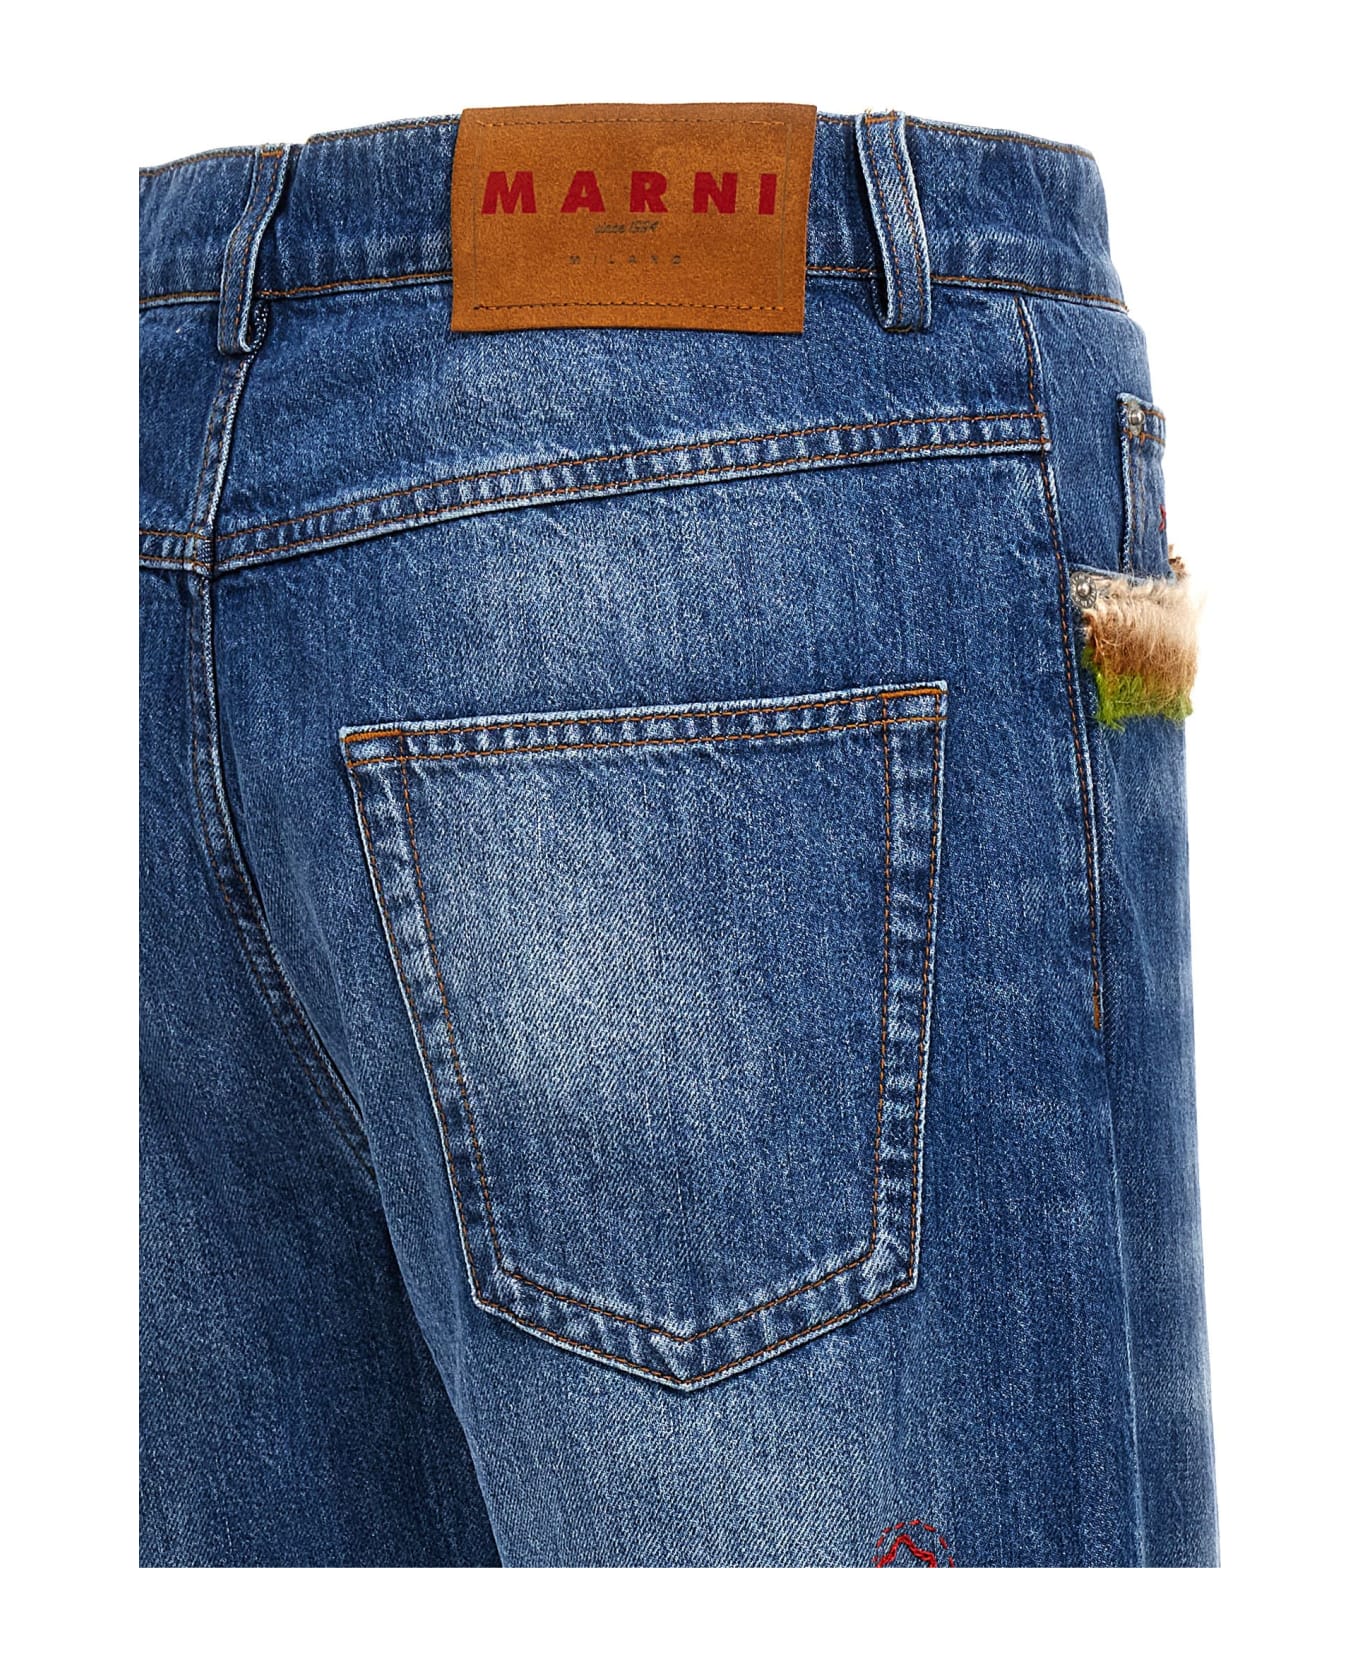 Marni Embroidery Jeans And Patches - Denim